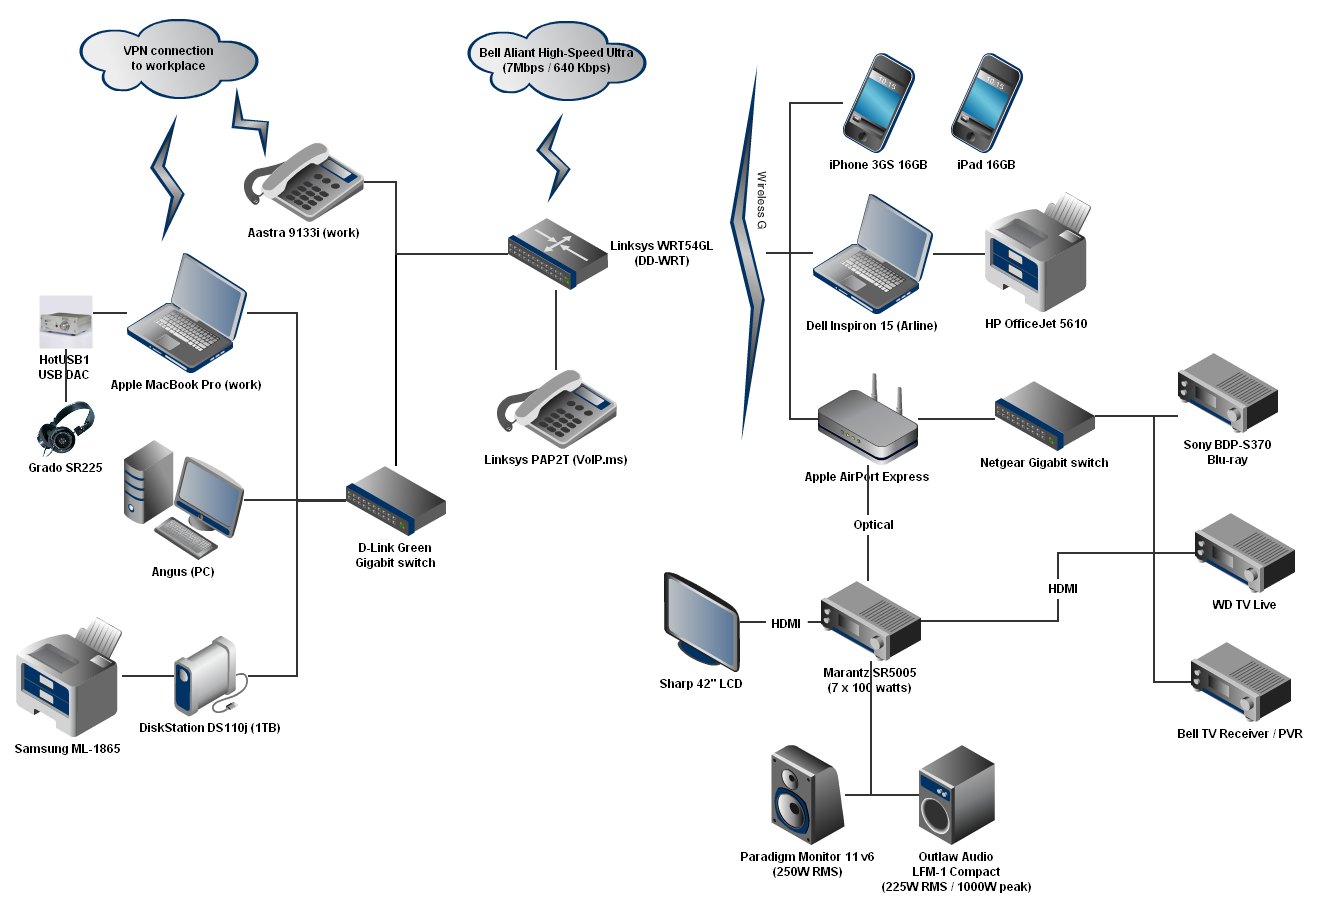 Home network/multimedia topology